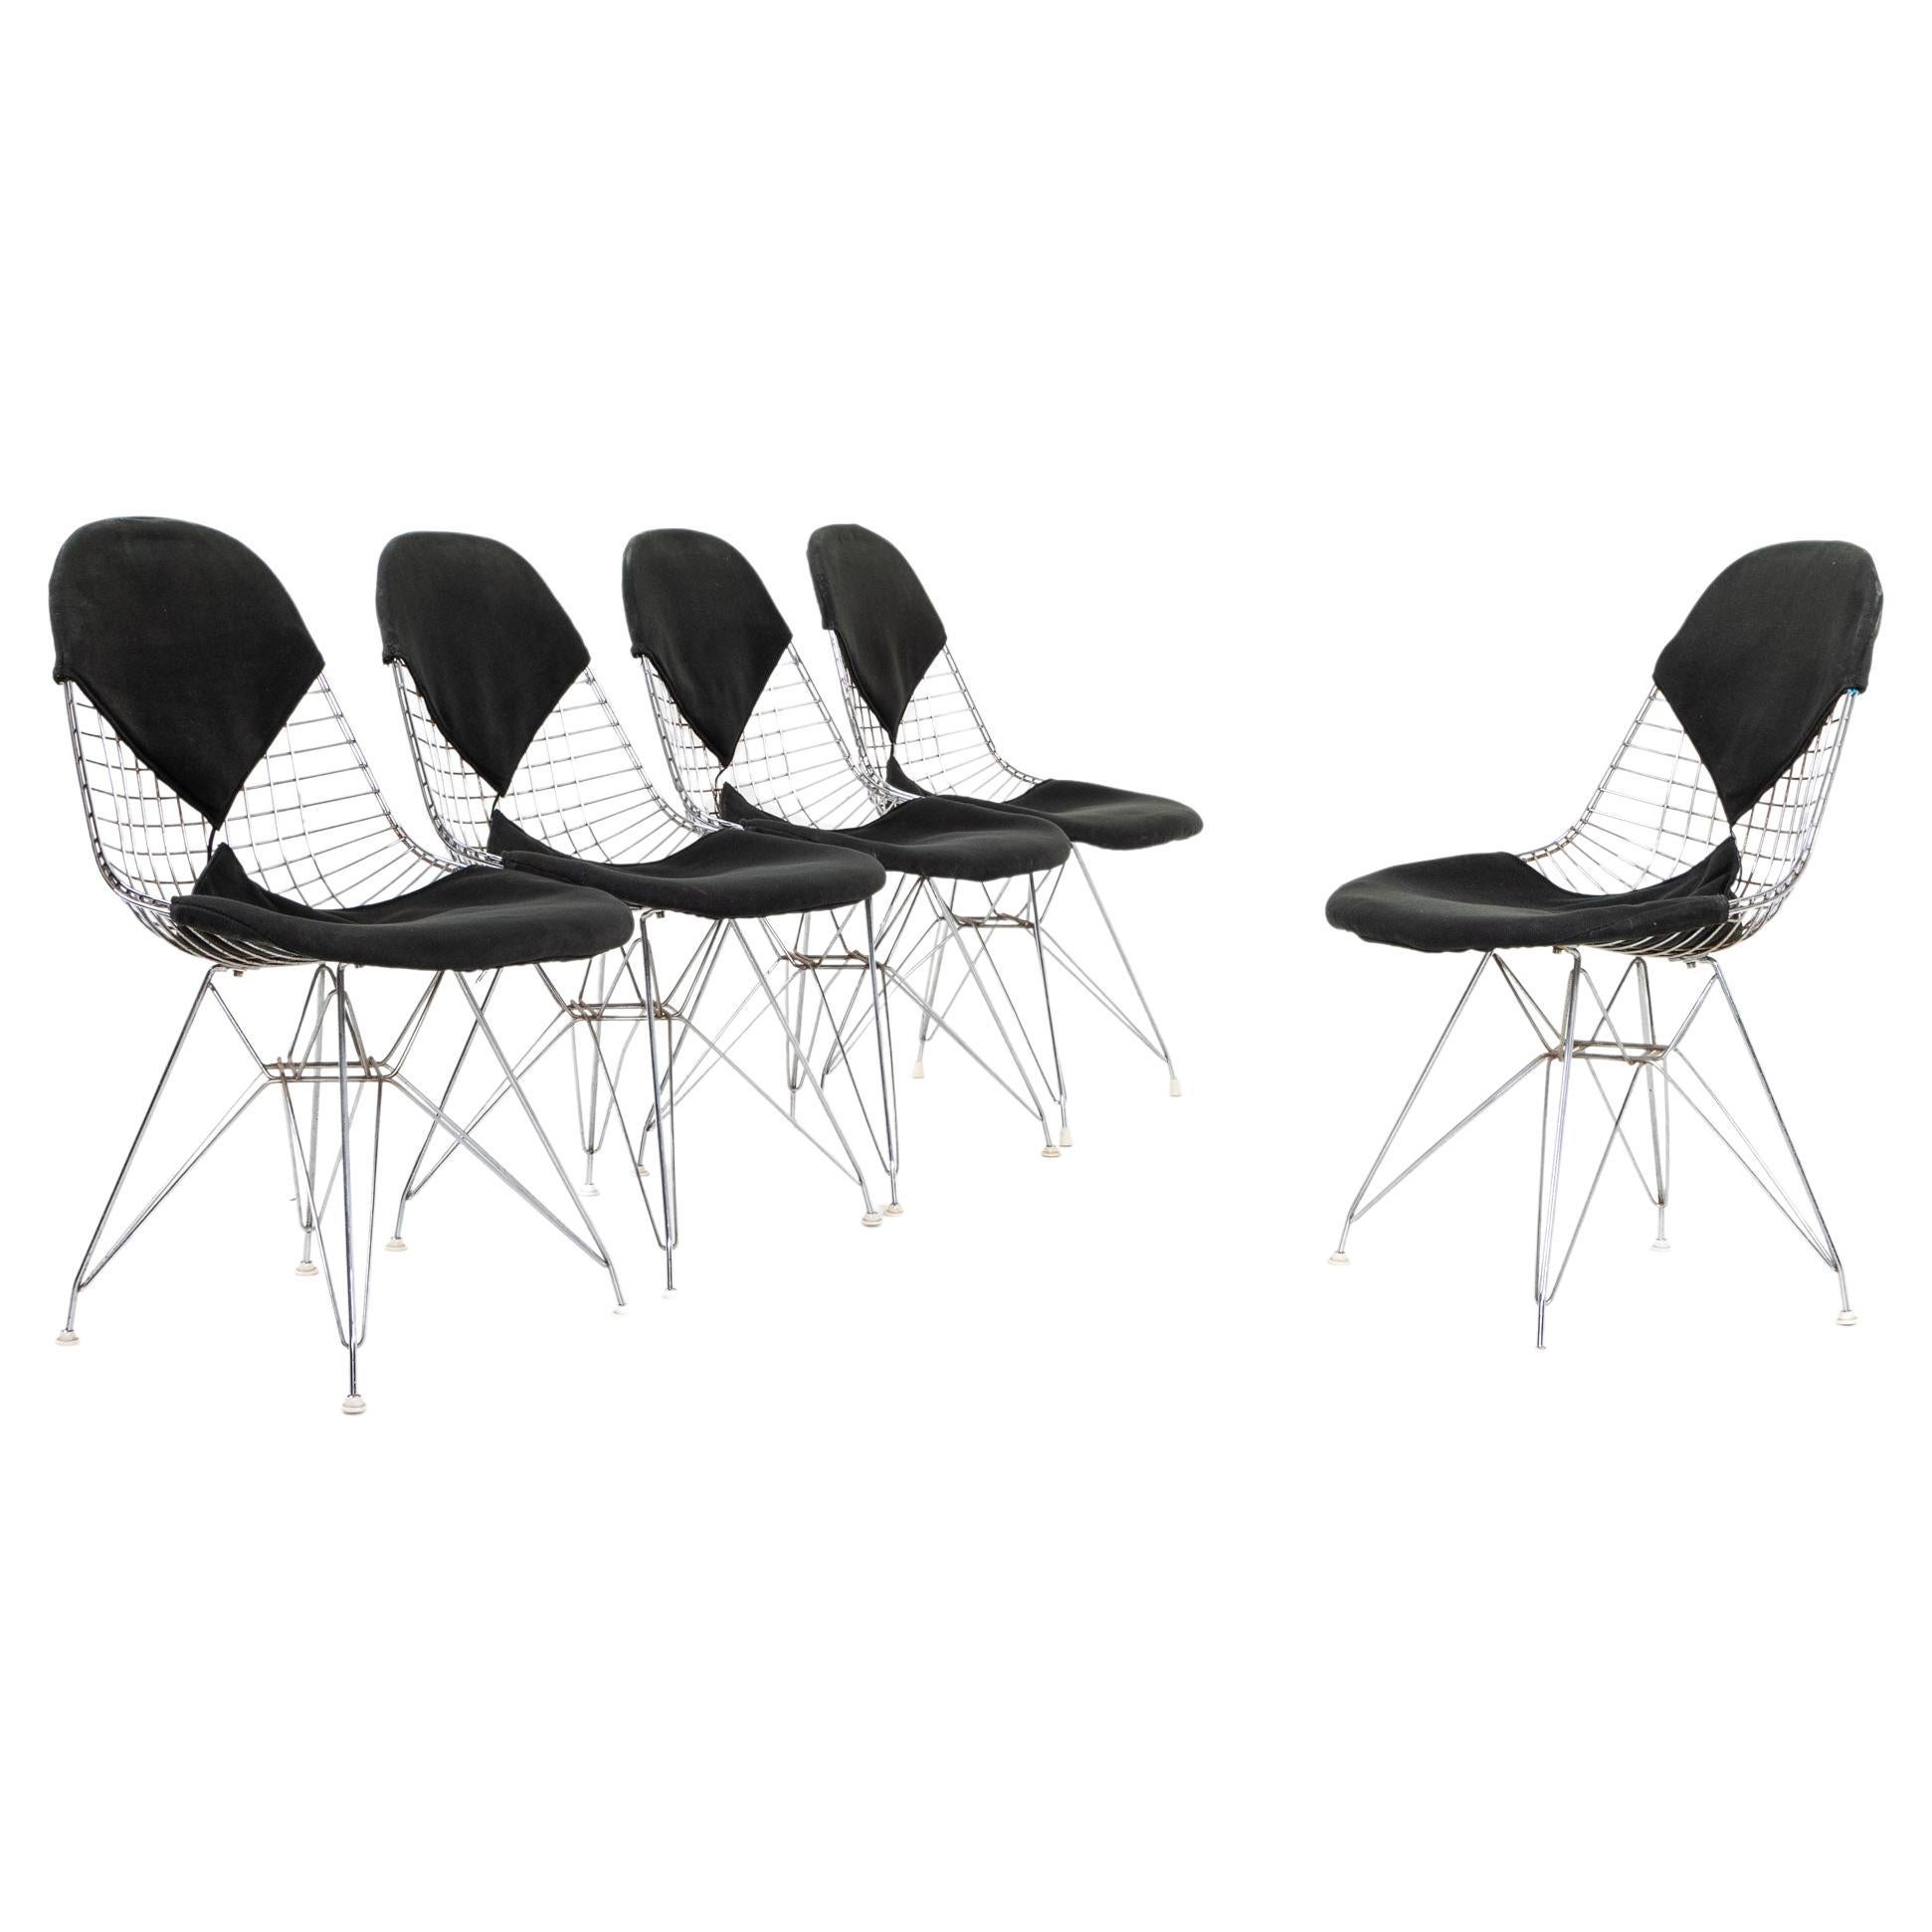 Eames Wire Bikini Chair DKR-2 with Black Cover, Design 1951